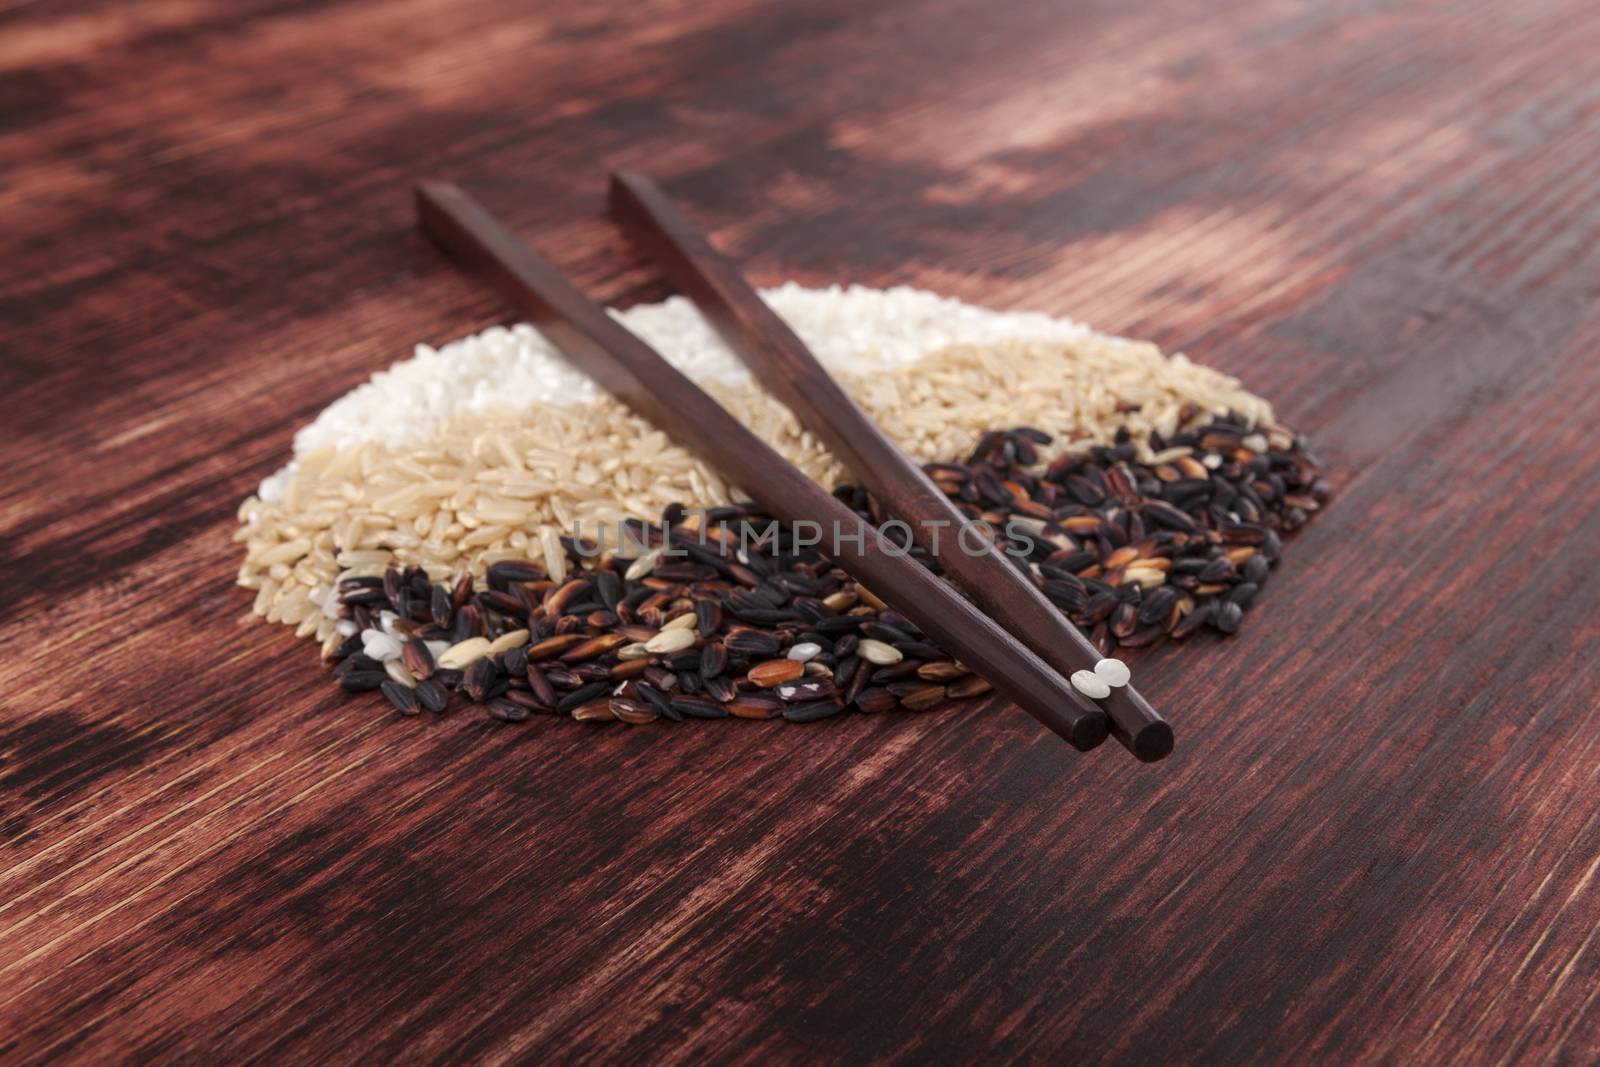 White, natural and wilde rice with chopsticks on dark wooden background. Healthy rice cooking concept.